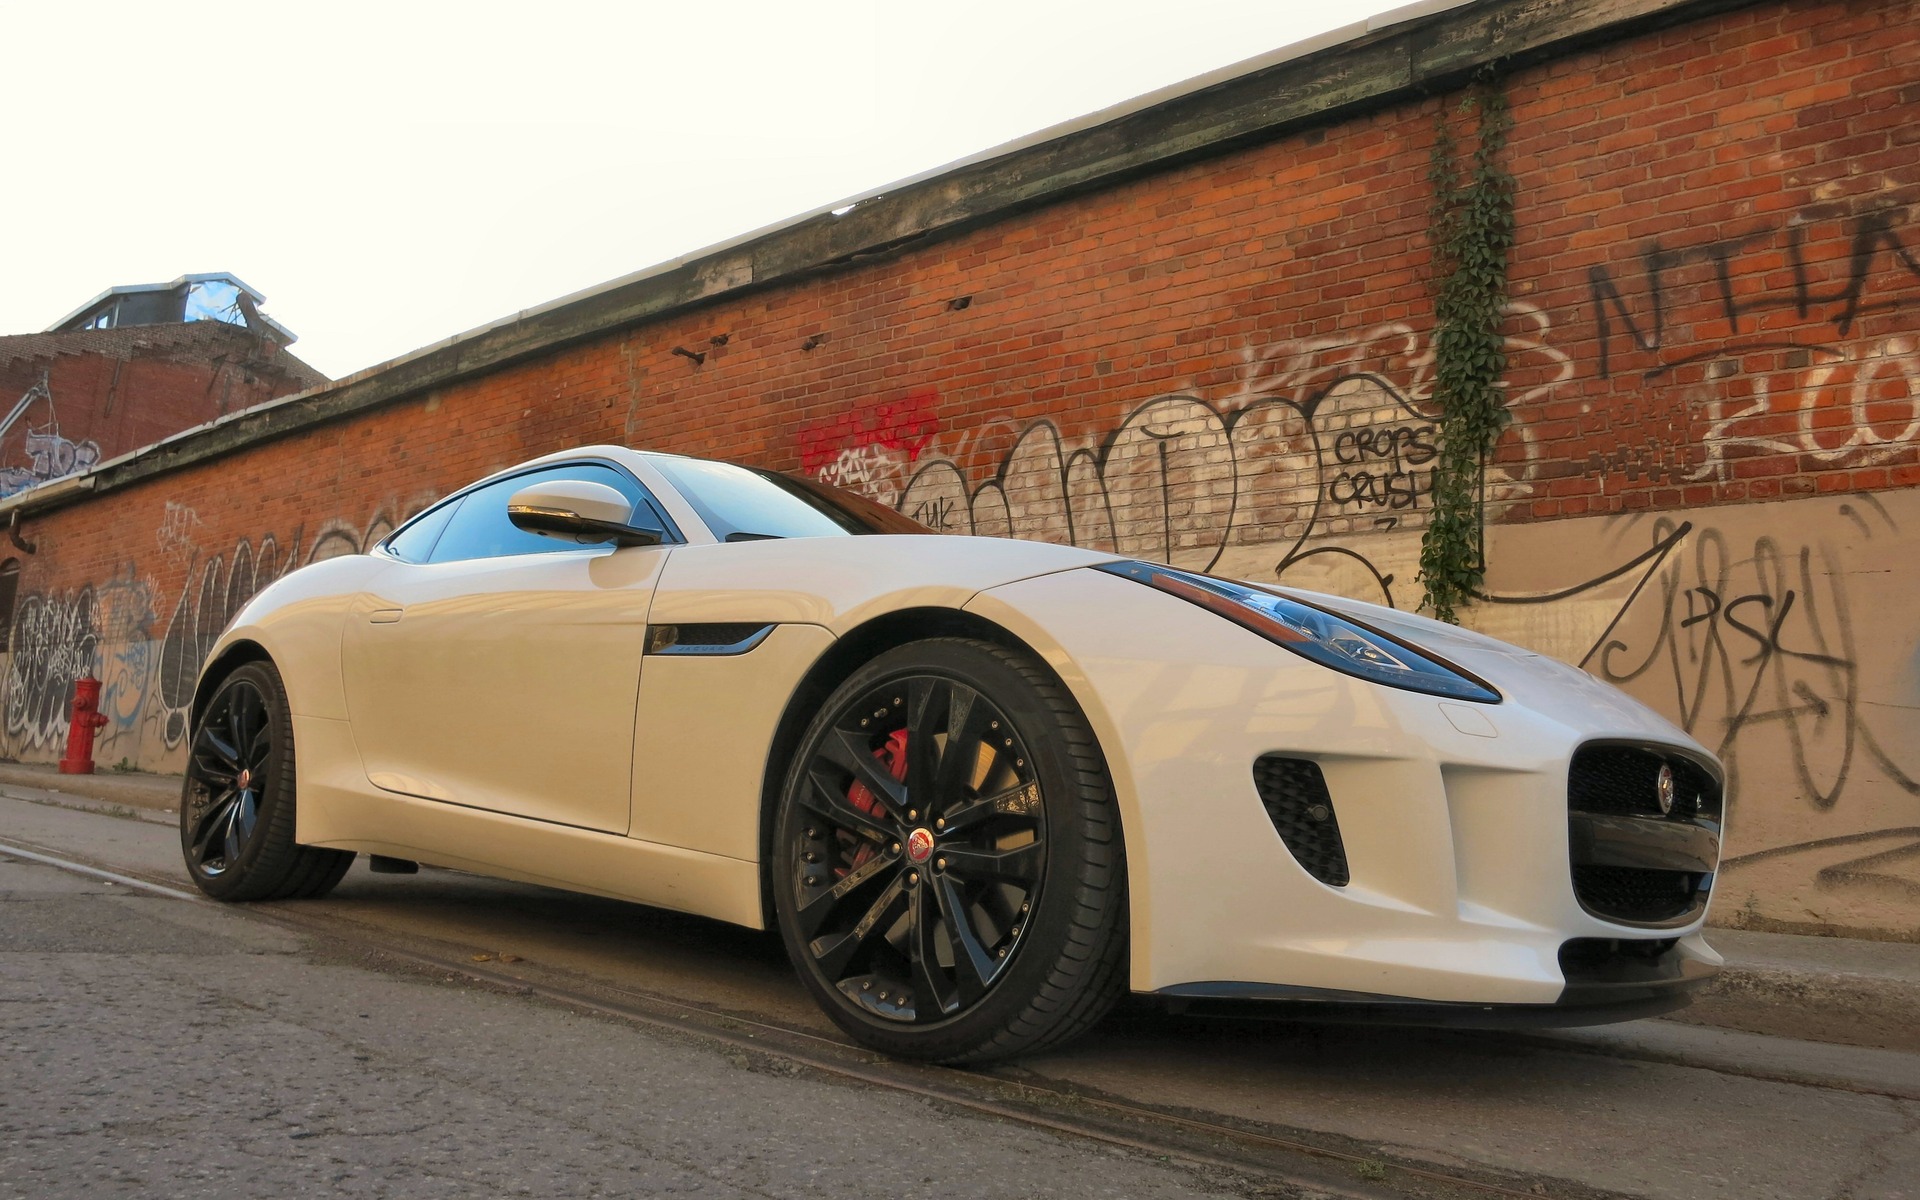 It would be enough for the Jaguar F-Type S coupe to coast on its looks.